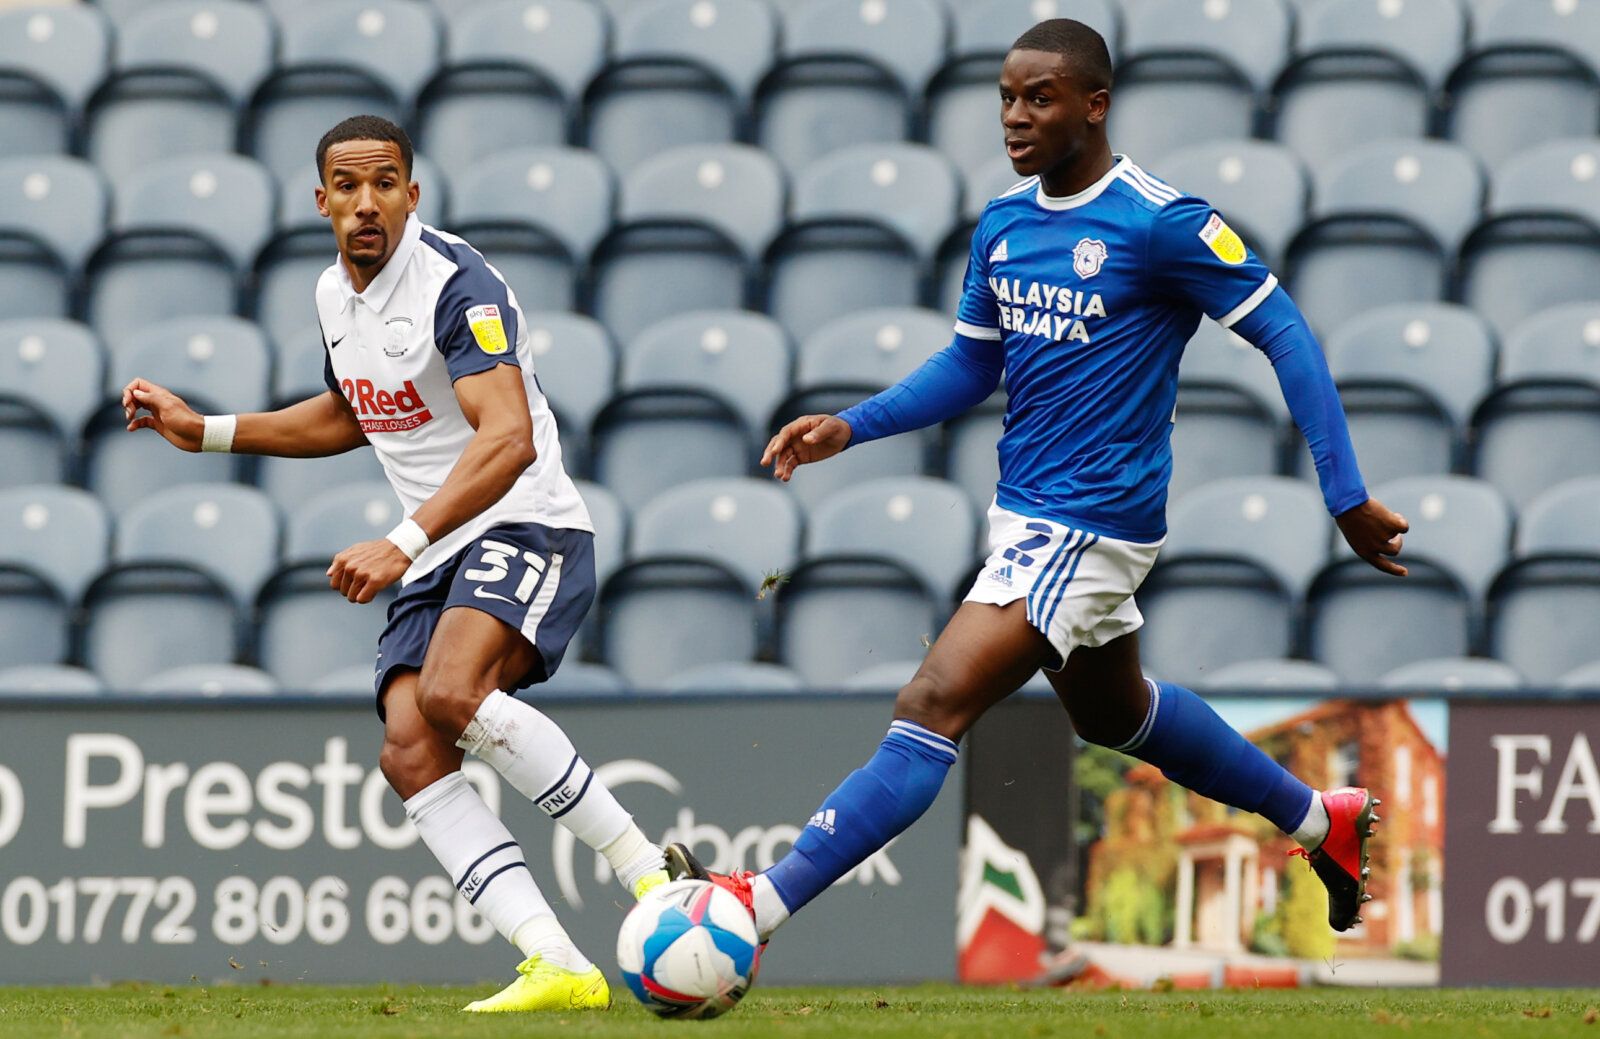 Soccer Football - Championship - Preston North End v Cardiff City - Deepdale, Preston, Britain - October 18, 2020 Cardiff City’s Jordi Osei-Tutu in action with Preston North End’s Scott Sinclair Action Images/Jason Cairnduff EDITORIAL USE ONLY. No use with unauthorized audio, video, data, fixture lists, club/league logos or 'live' services. Online in-match use limited to 75 images, no video emulation. No use in betting, games or single club /league/player publications.  Please contact your accou